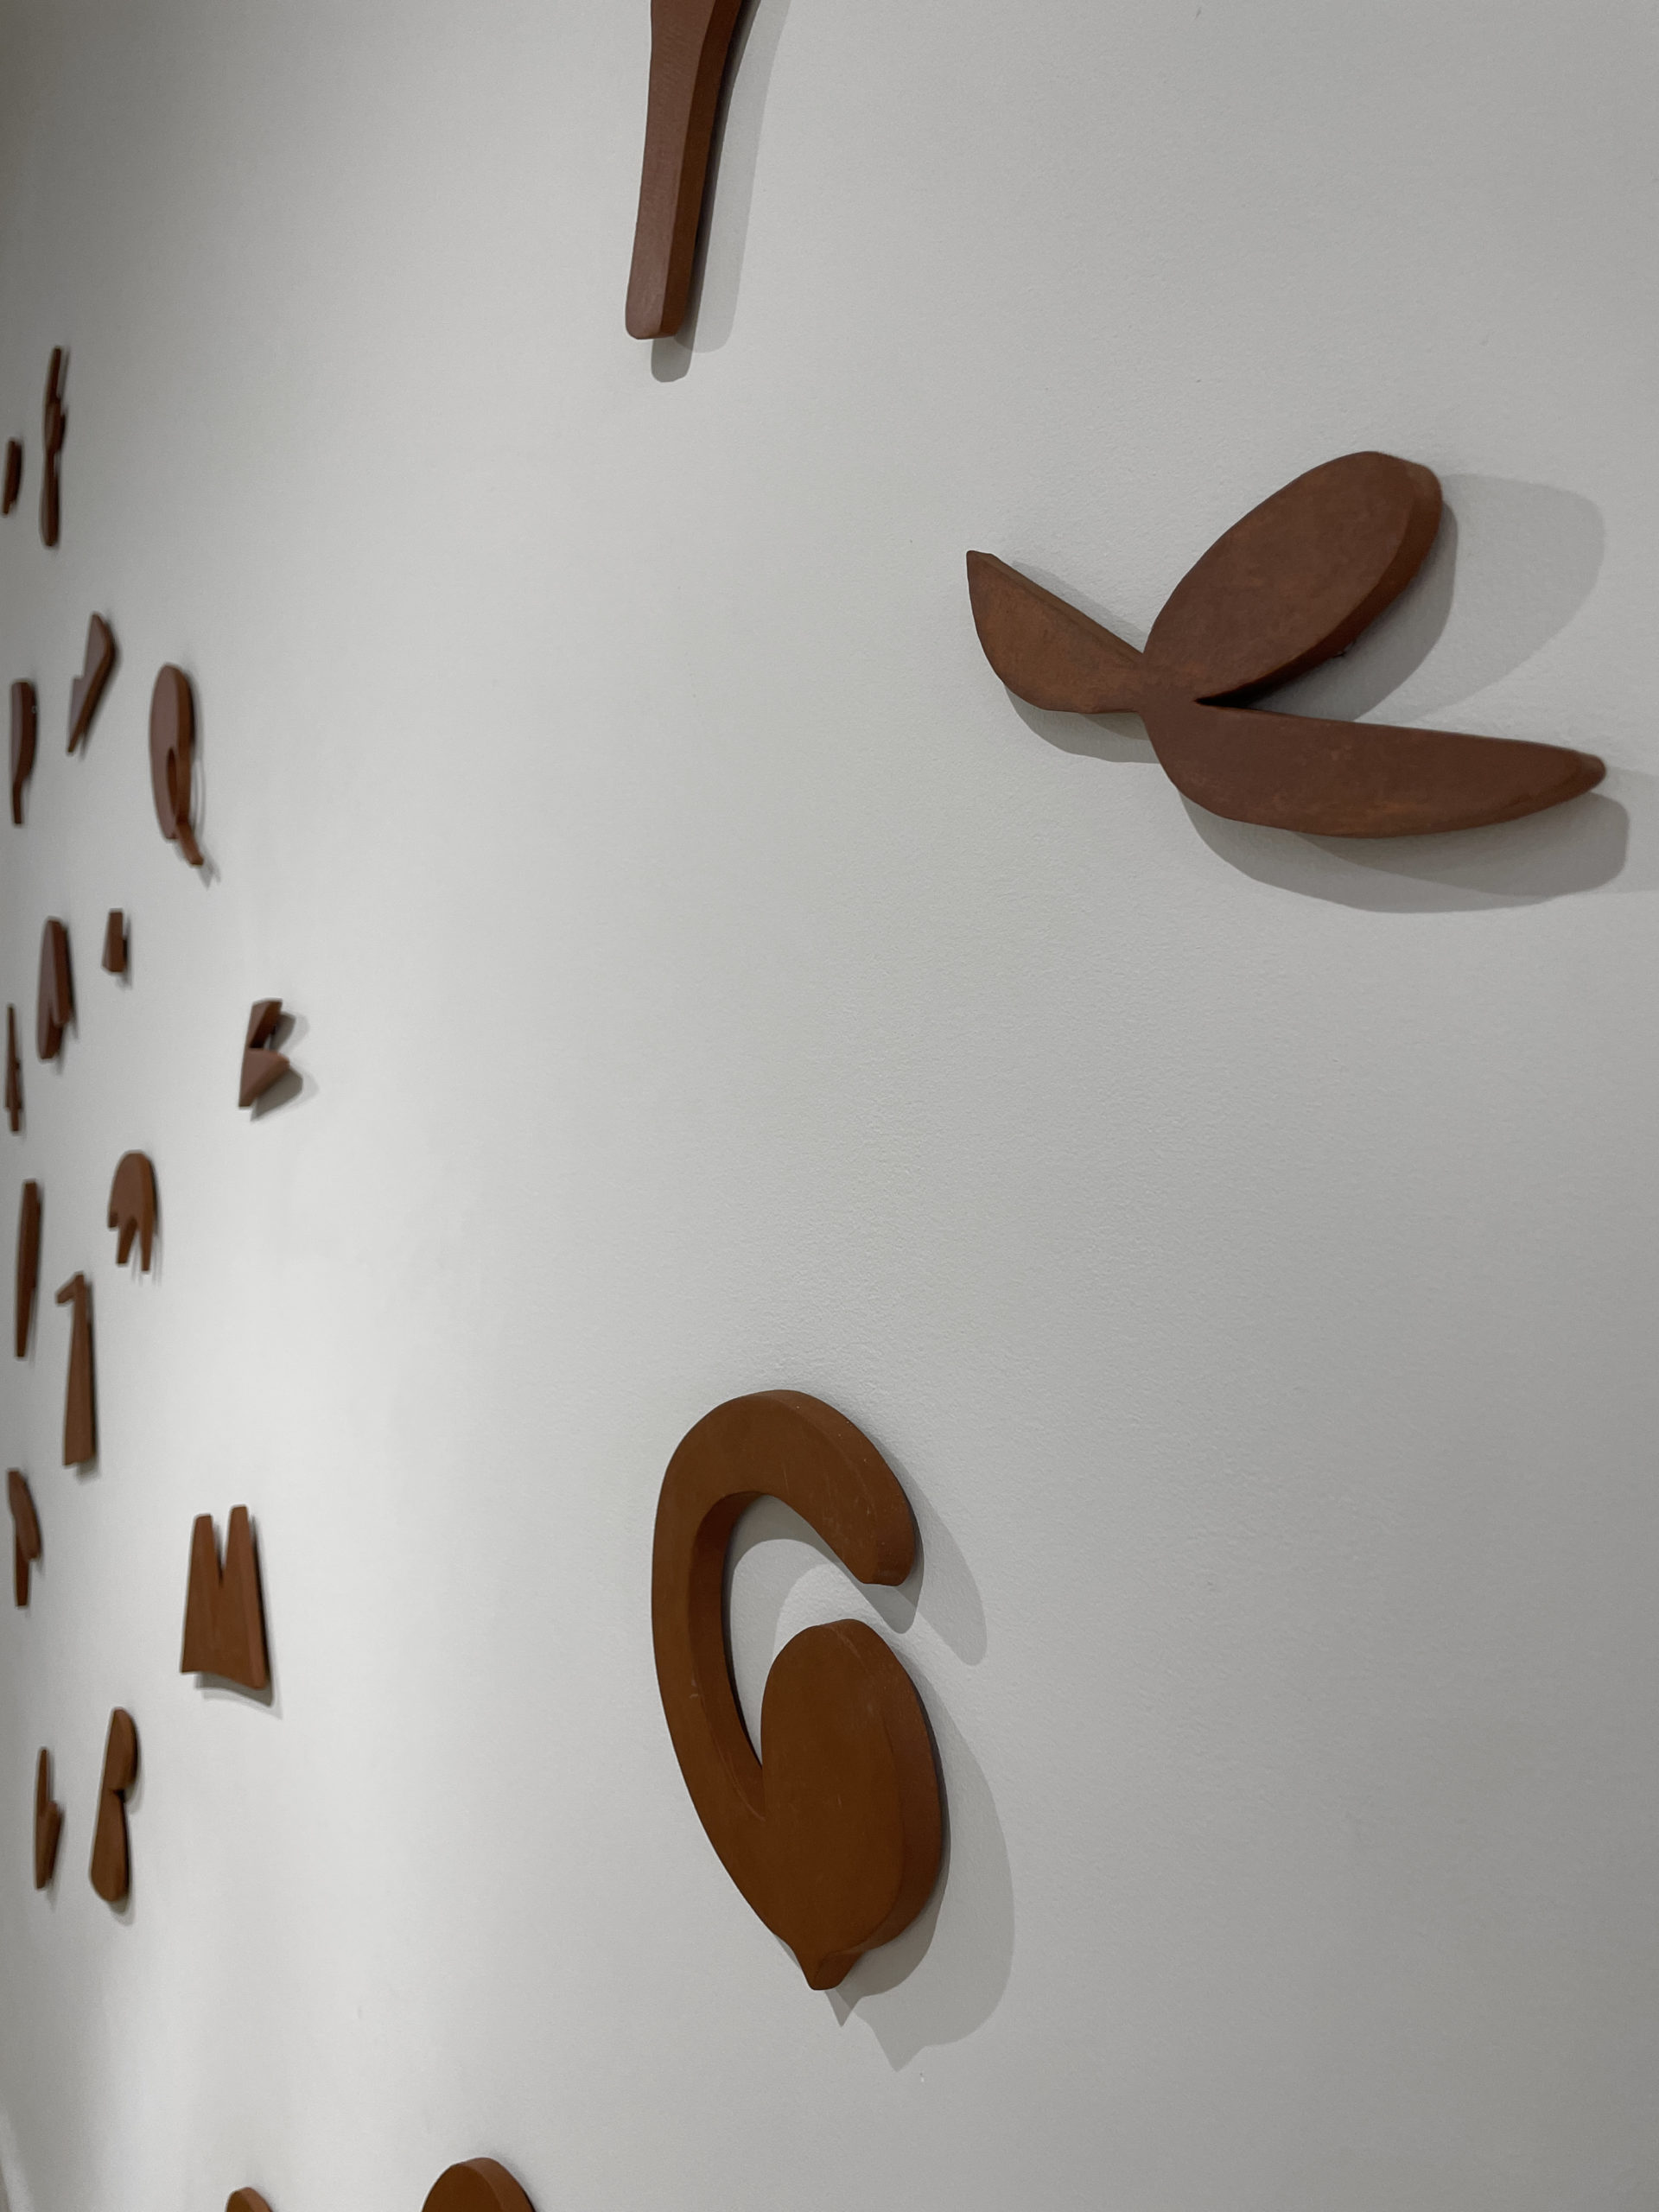 brown ceramic shapes scattered on the wall